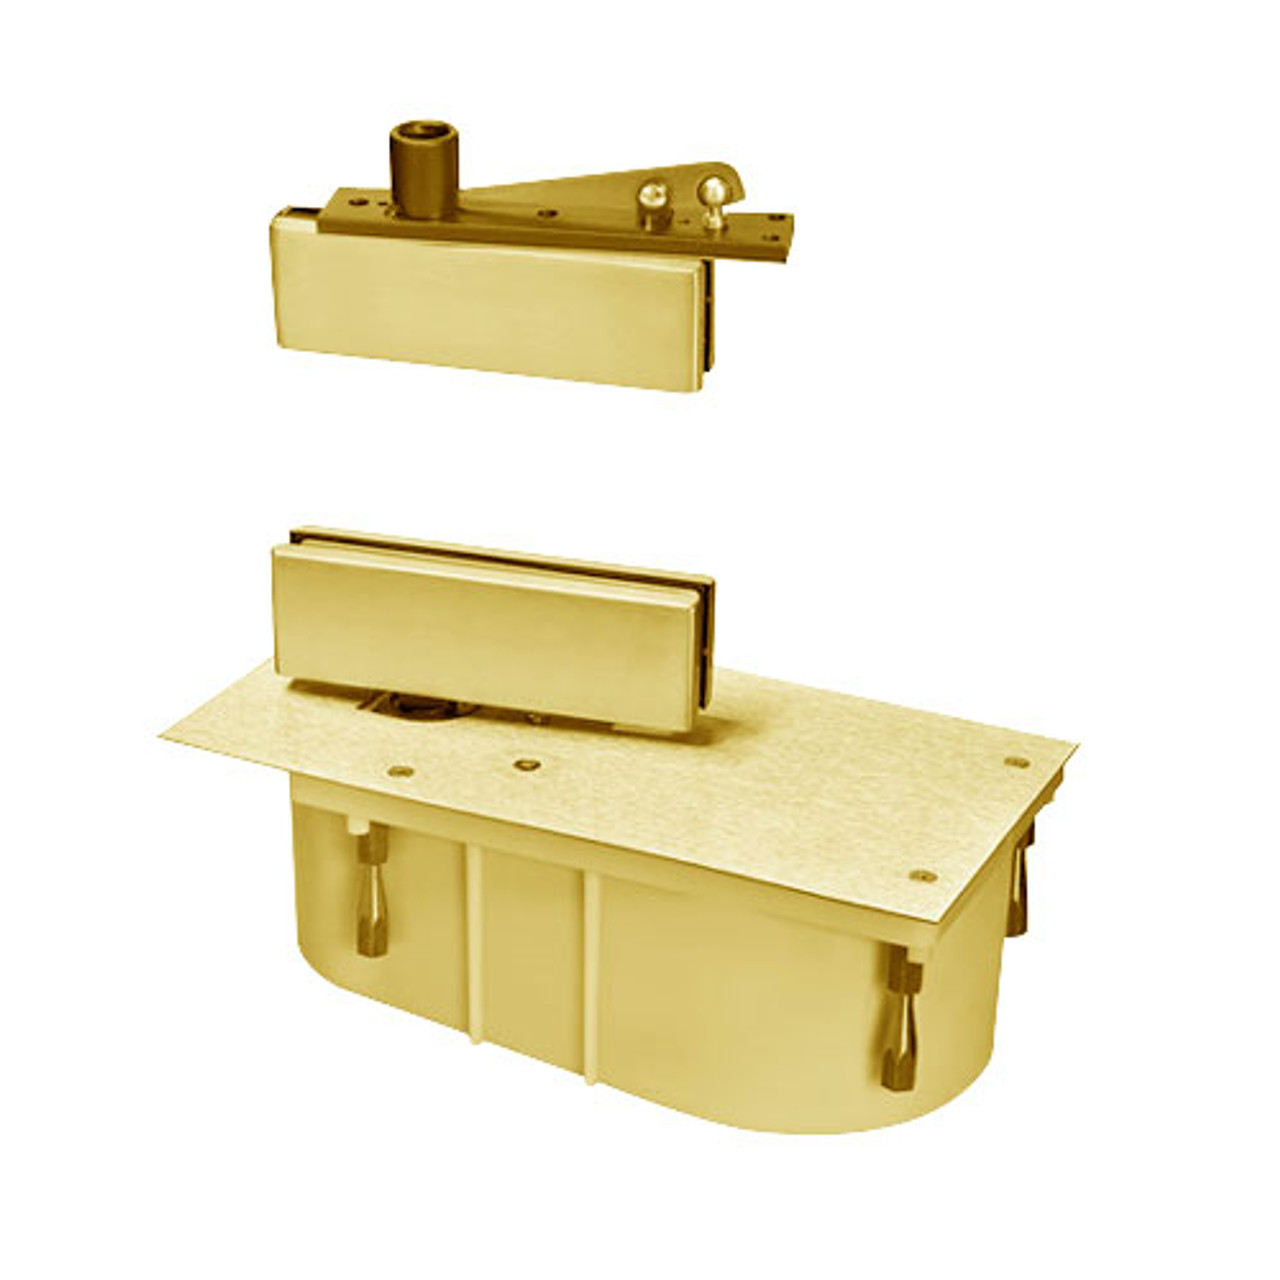 428-95N-LTP-RH-605 Rixson 428 Series Heavy Duty Single Acting Center Hung Floor Closer with Patch Fittings in Bright Brass Finish